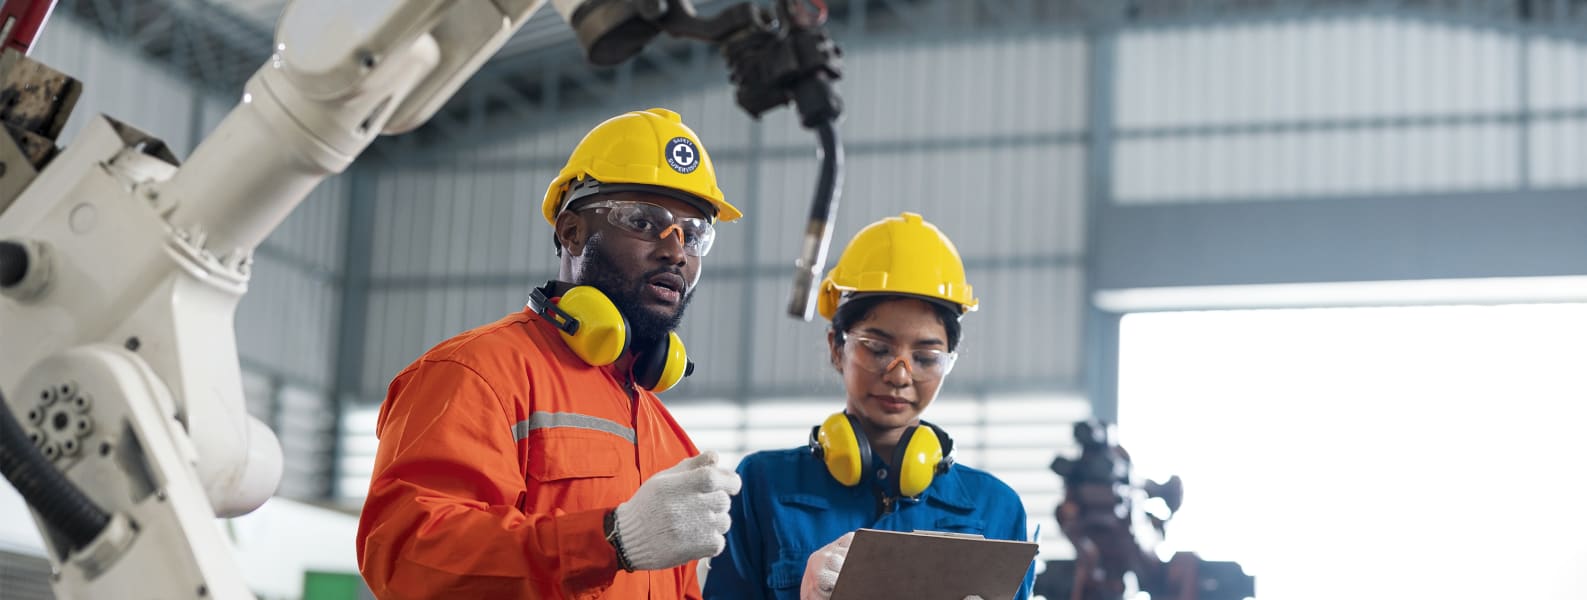 Image of two Industrial workers in safety gear looking at a clipboard